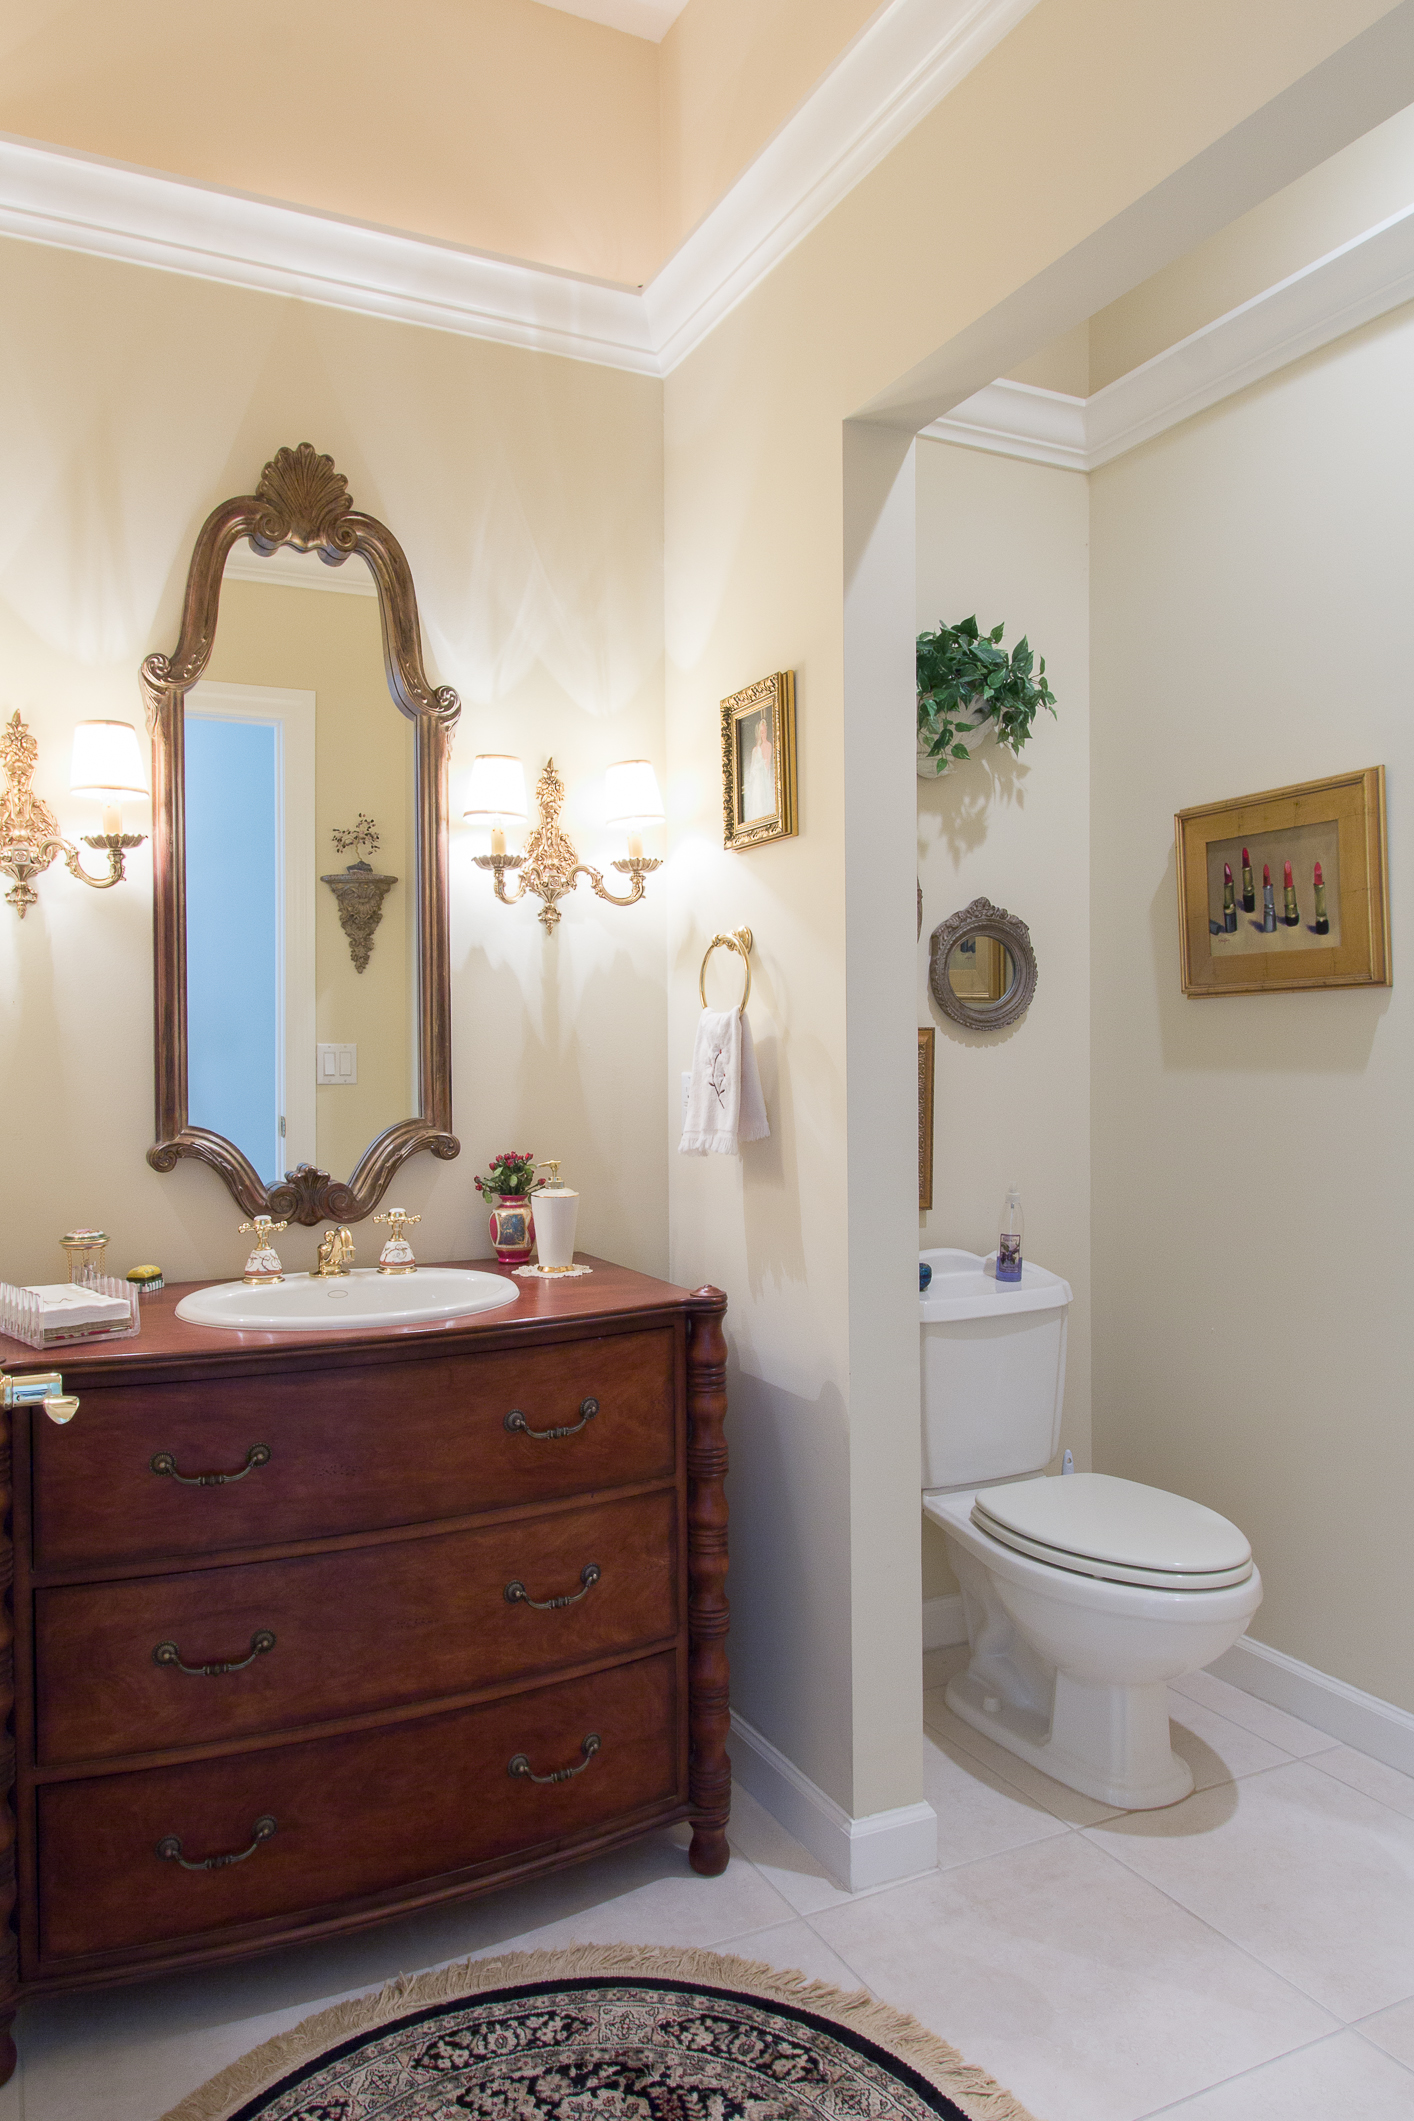 A vertical photograph of a bathroom with dresser vanity and crown molding